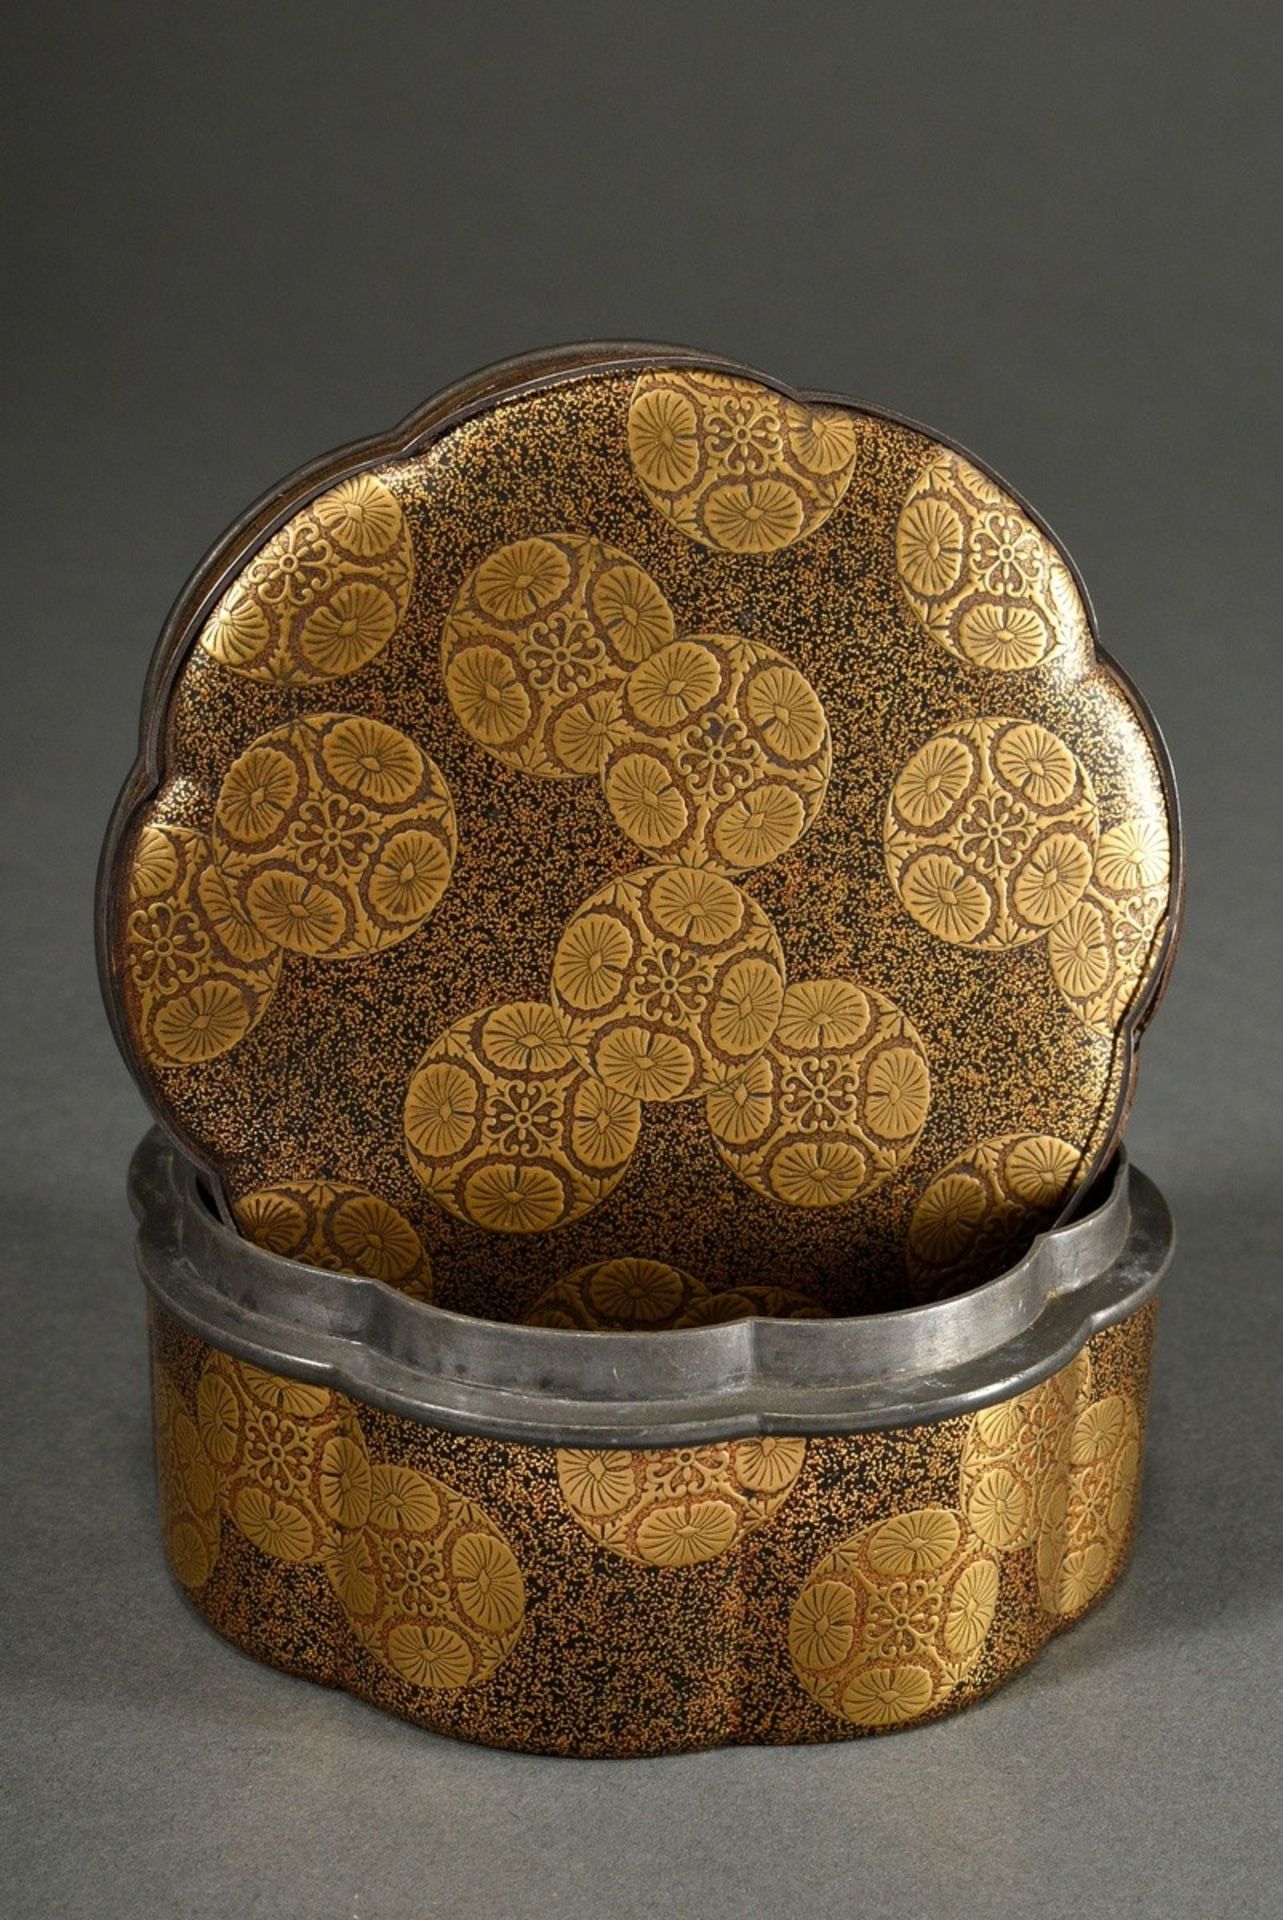 Flower-shaped eight-pass Urushi lacquer box with "Chrysanthemum Mons", loose lead rim on top, Japan